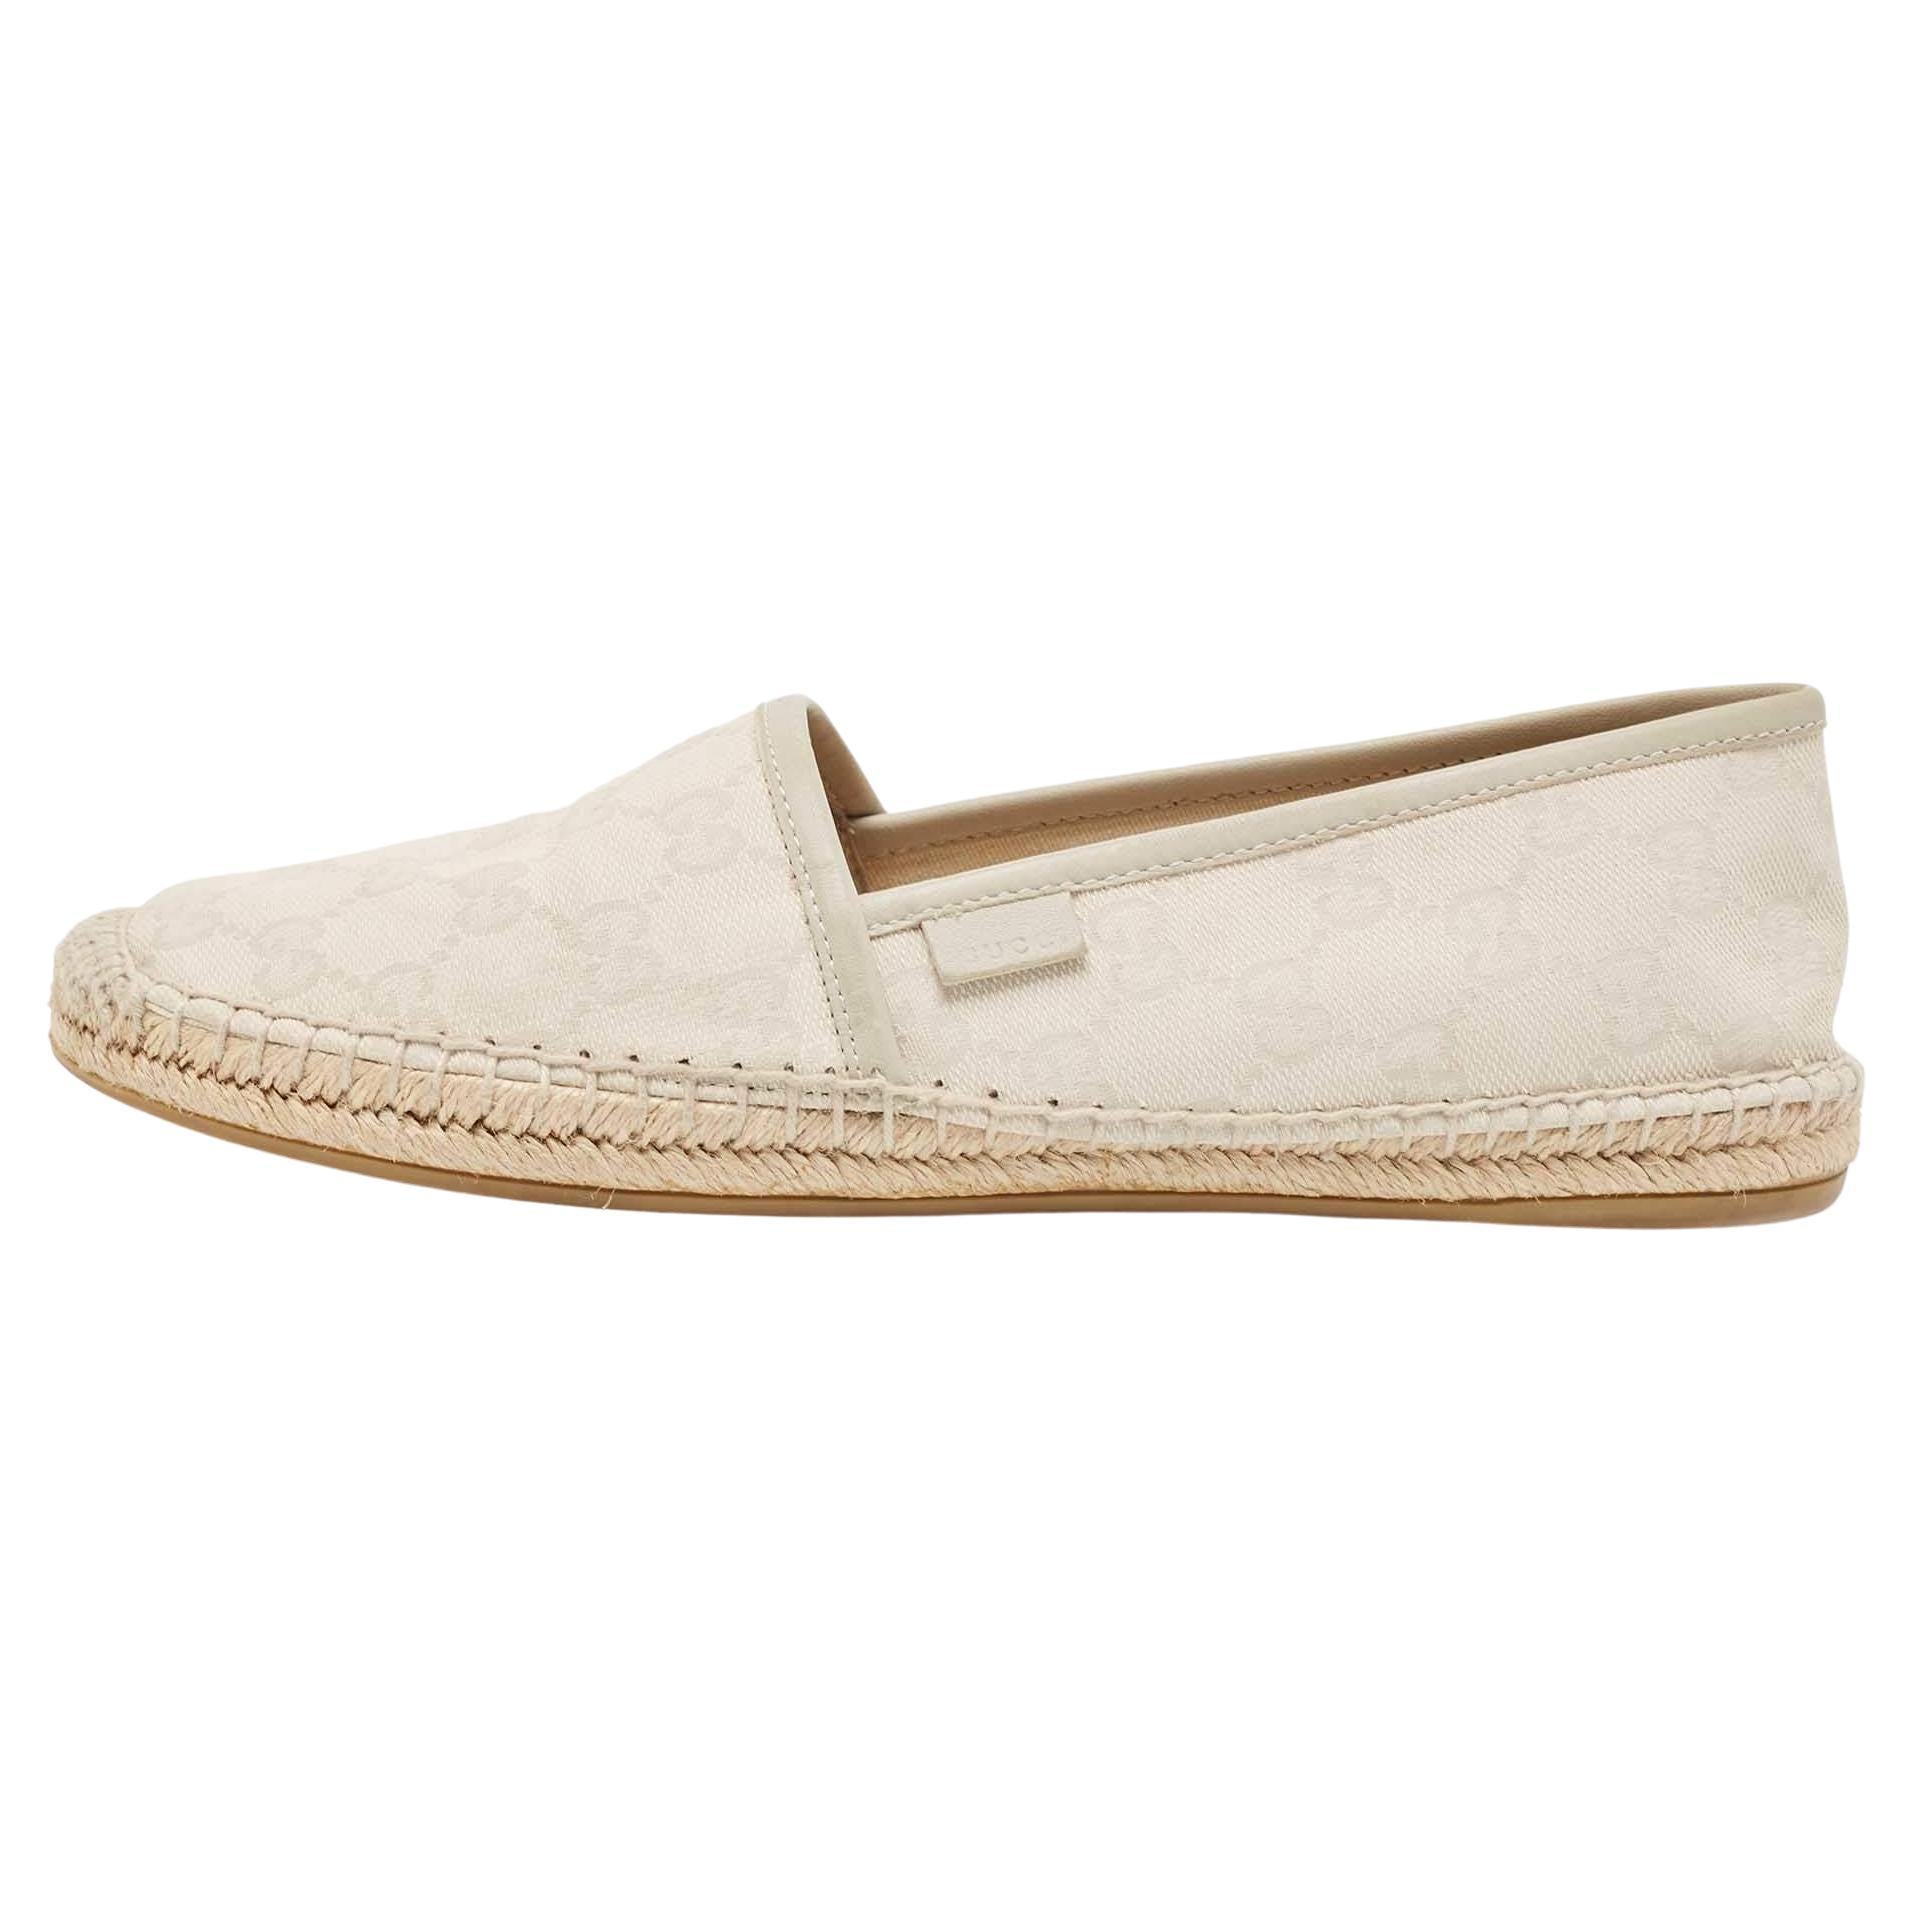 Gucci Cream/Grey GG Canvas and Leather Espadrilles Flats Size 38.5 For Sale